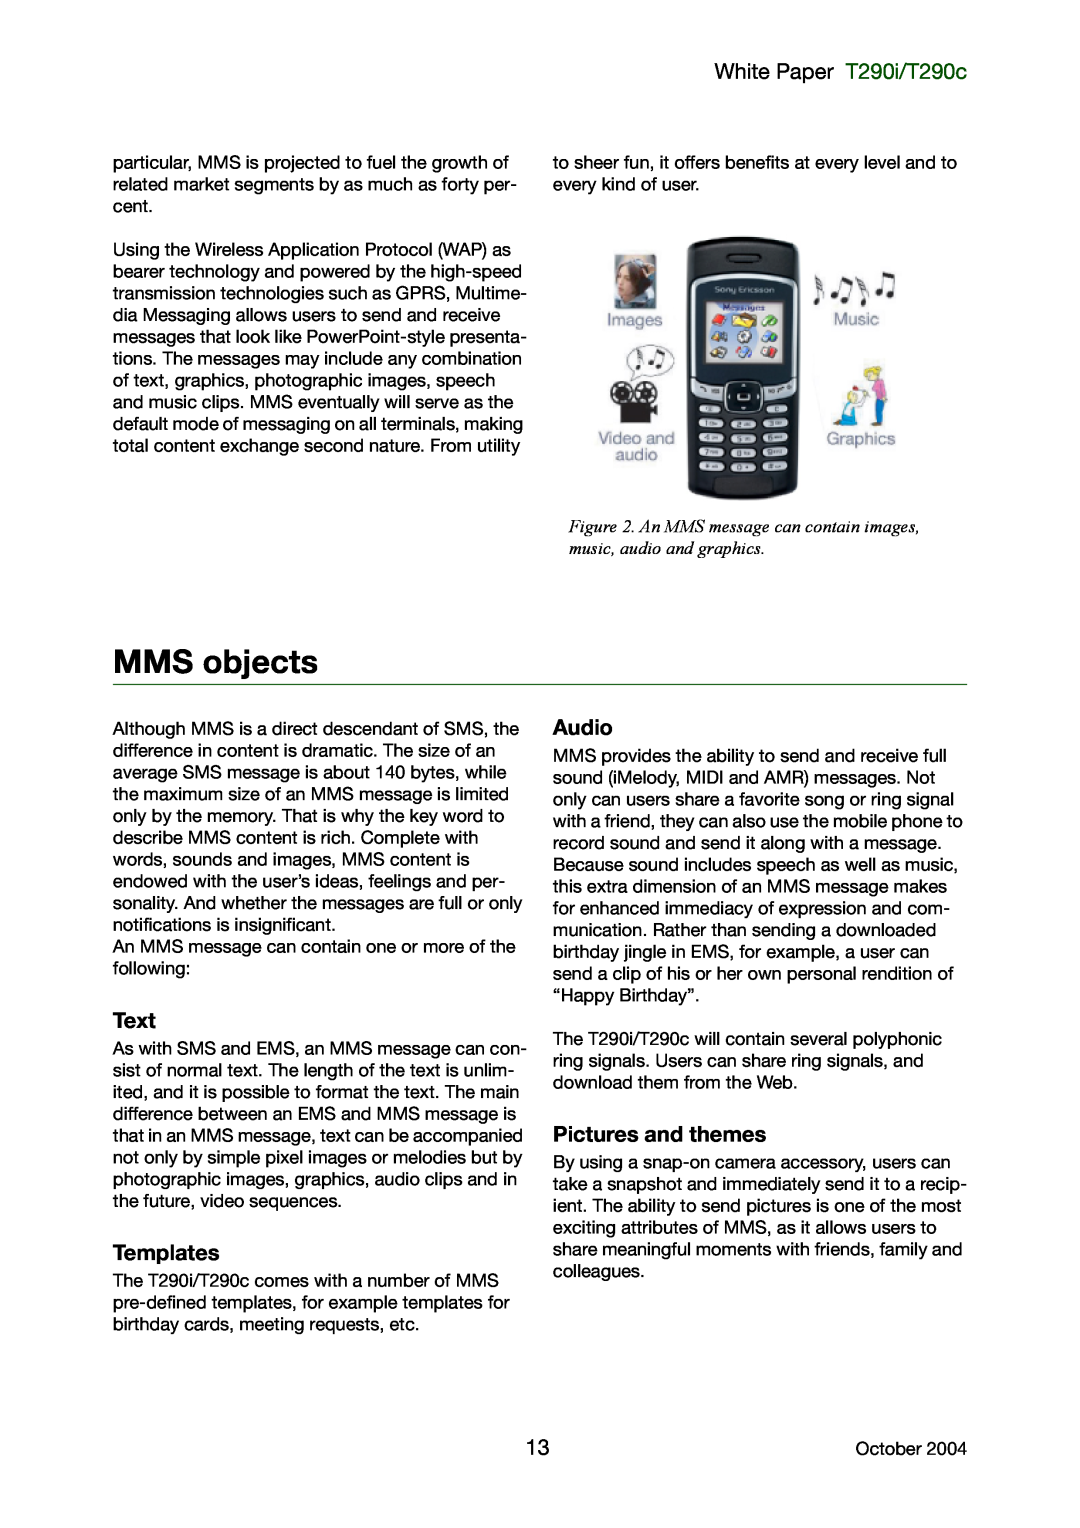 Sony Ericsson manual MMS objects, White Paper T290i/T290c 